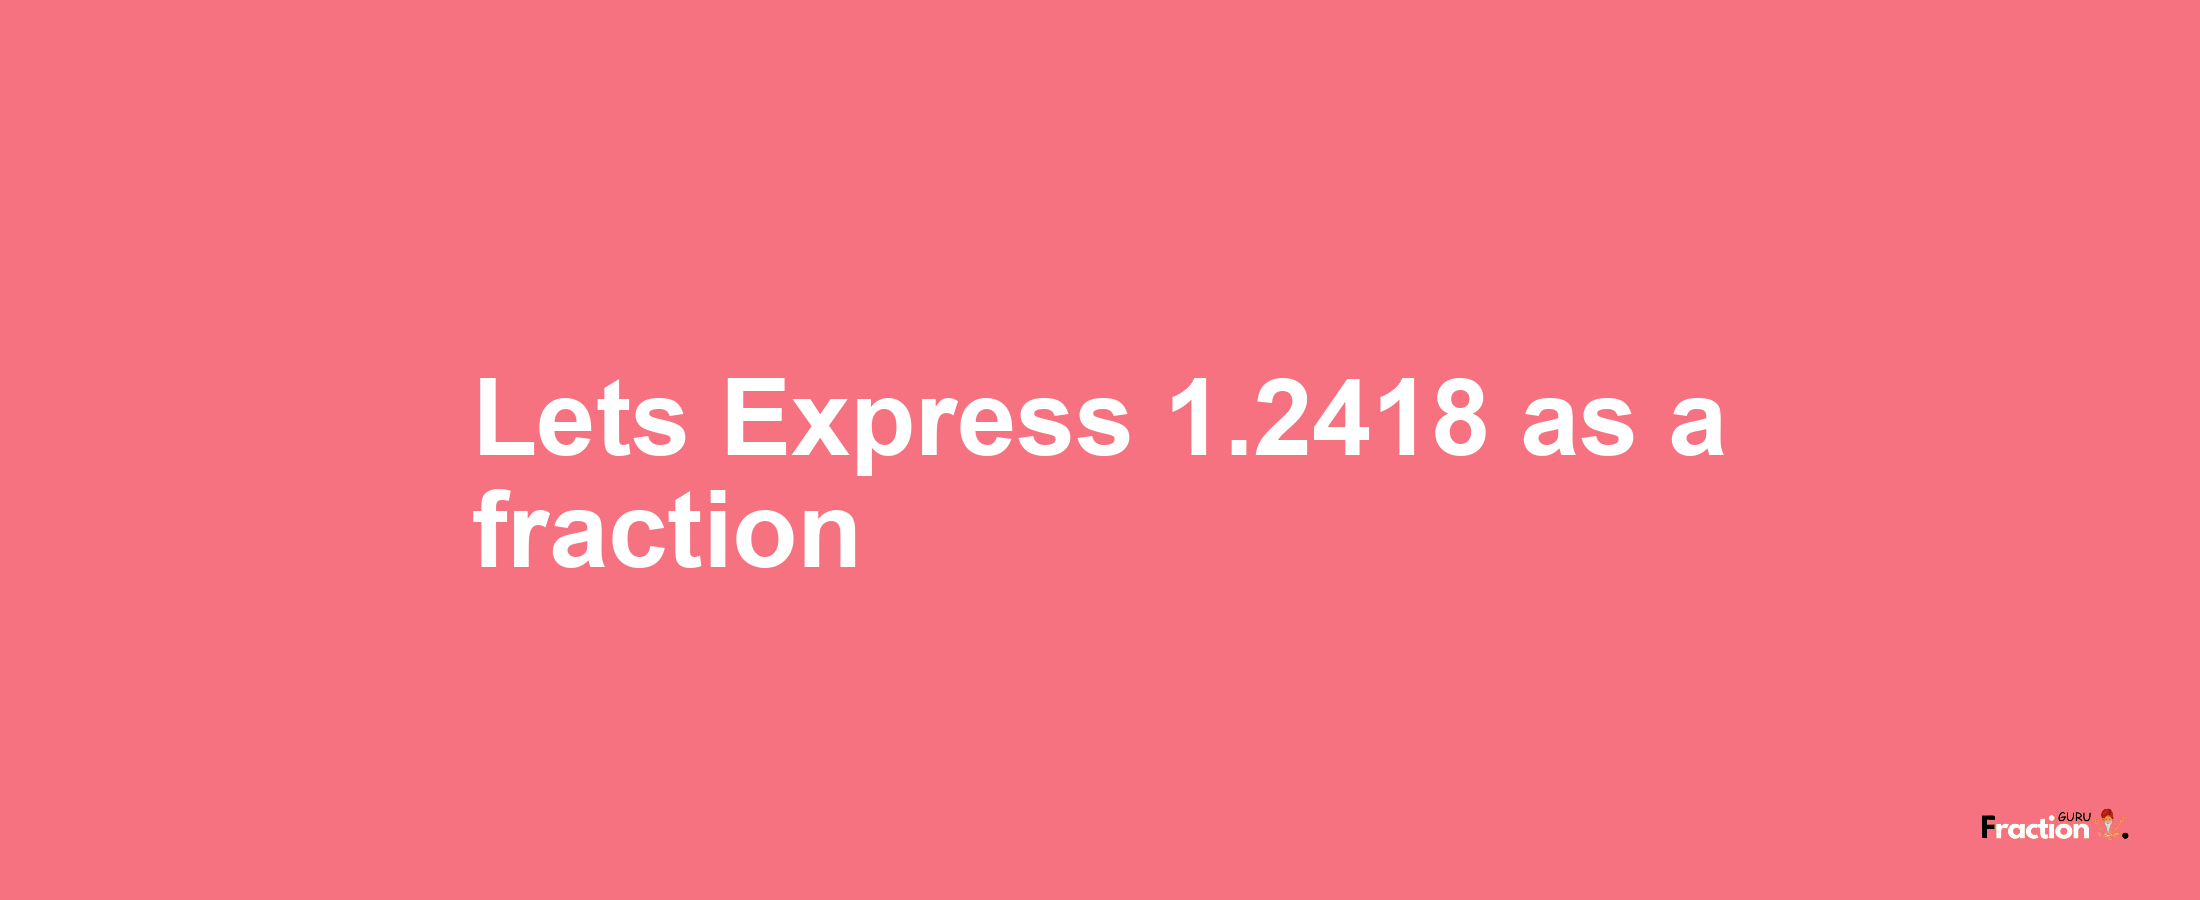 Lets Express 1.2418 as afraction